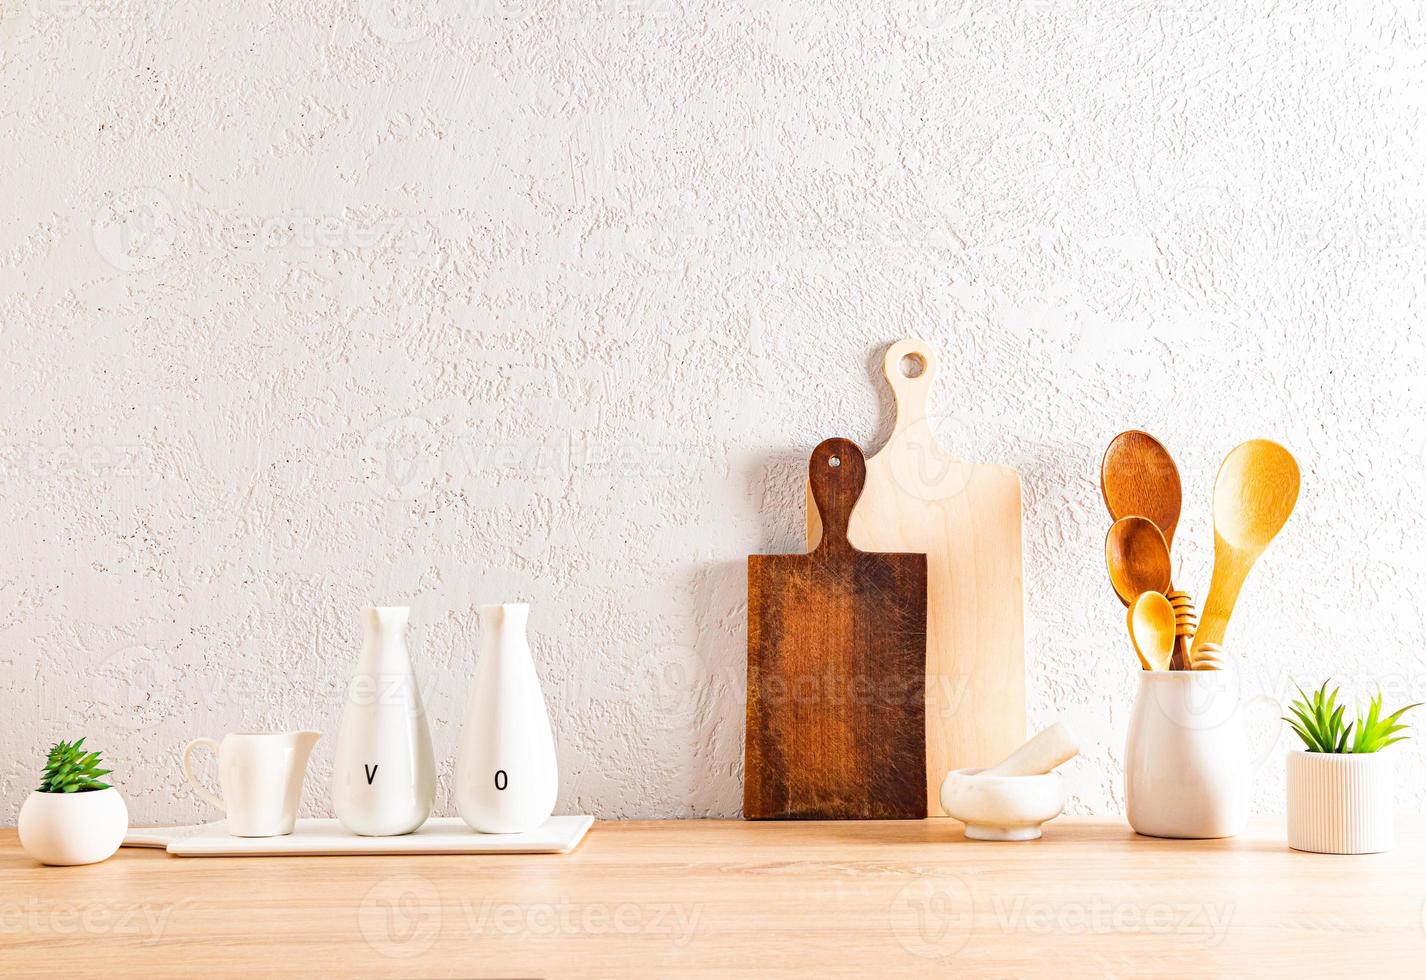 modern kitchen background with utensils on a wooden countertop against the textured wall. space for text. ECO items. photo